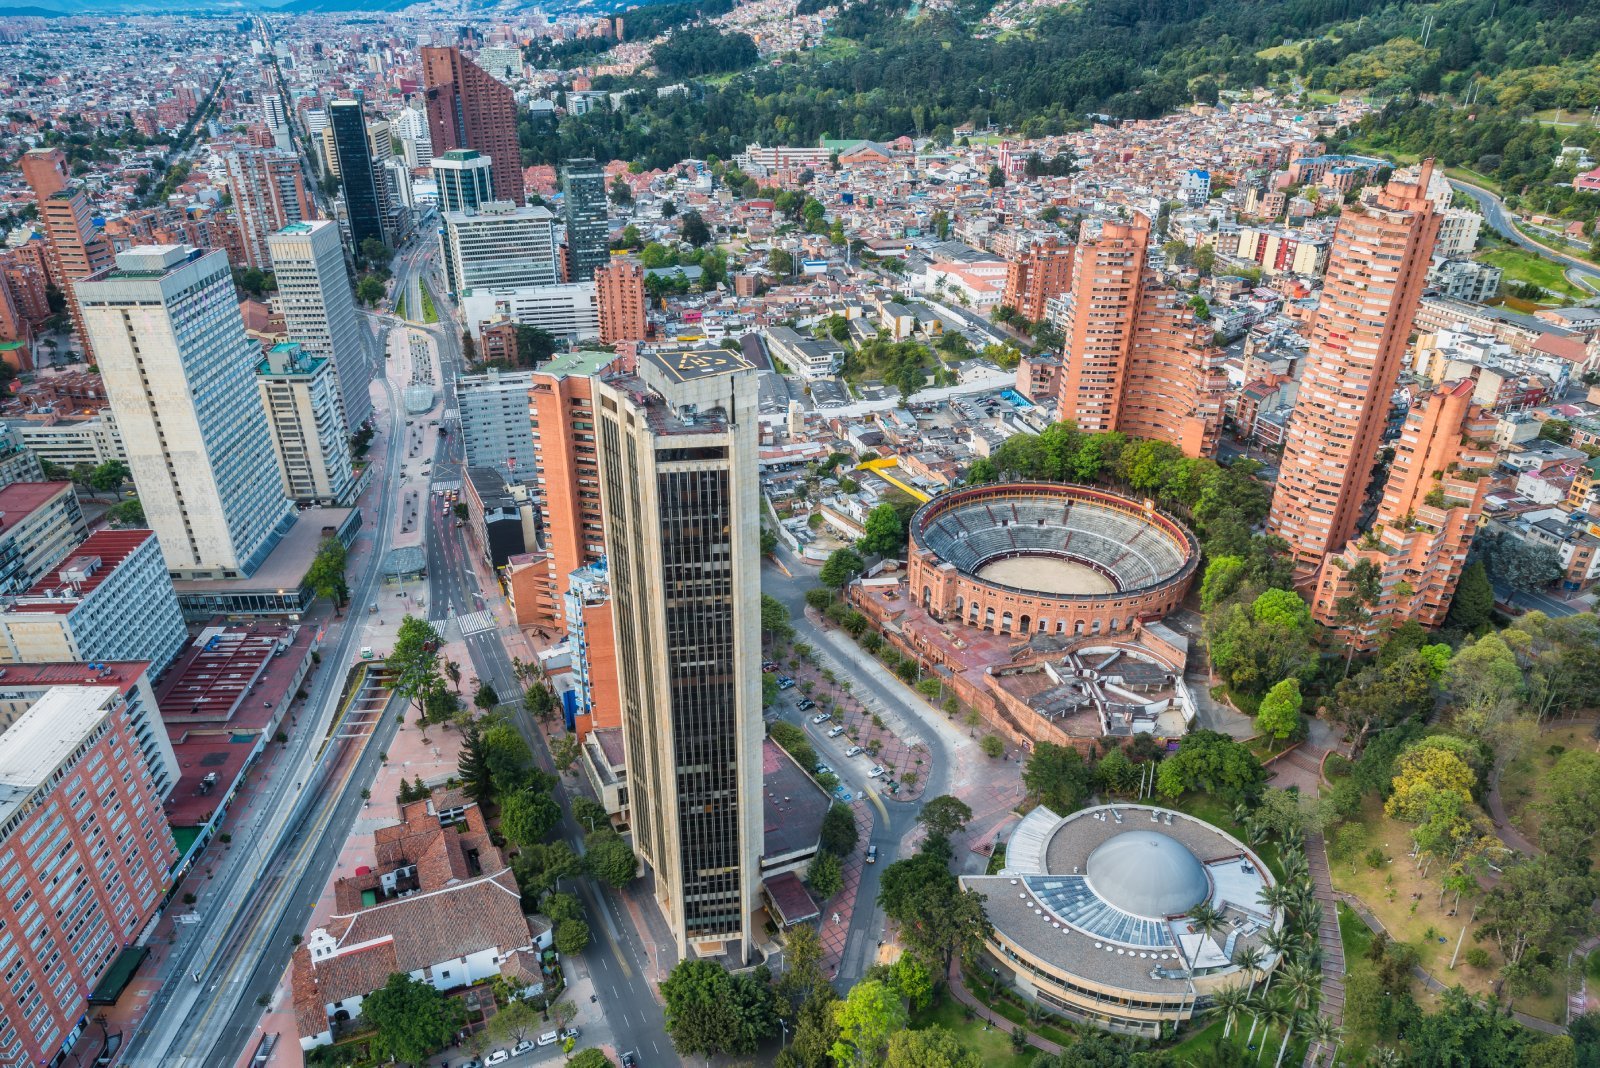 <p class="wp-caption-text">Image Credit: Shutterstock / Santiago Robayo Escobar</p>  <p><span>Bogota, the capital city of Colombia, is a vibrant metropolis that serves as the country’s cultural, political, and financial center. Situated at an altitude of 2,640 meters above sea level, Bogota is one of the highest capitals in the world, offering a cool climate and breathtaking views of the surrounding Andean peaks. The city is a melting pot of cultures, reflected in its diverse culinary scene, lively festivals, and rich artistic expressions. Bogota’s historical heart, La Candelaria, is a charming district with cobblestone streets, colonial architecture, and significant landmarks such as the Gold Museum, which houses the world’s most extensive pre-Hispanic gold artifacts. The city is also known for its green spaces, including the expansive Simon Bolivar Park and the Bogota Botanical Garden, which provide residents and visitors alike with a respite from urban life. Bogota’s commitment to sustainability is evident in its extensive network of bicycle paths and public transportation system.</span></p> <p><b>Insider’s Tip: </b><span>For a panoramic view of Bogota, take the cable car or funicular to the top of Monserrate Hill. This iconic landmark offers not only spectacular city views but also has a historic church and several eateries.</span></p> <p><b>When to Travel: </b><span>December to March during the dry season.</span></p> <p><b>How to Get There:</b><span> El Dorado International Airport (BOG) serves as the main entry point with numerous international flights.</span></p>